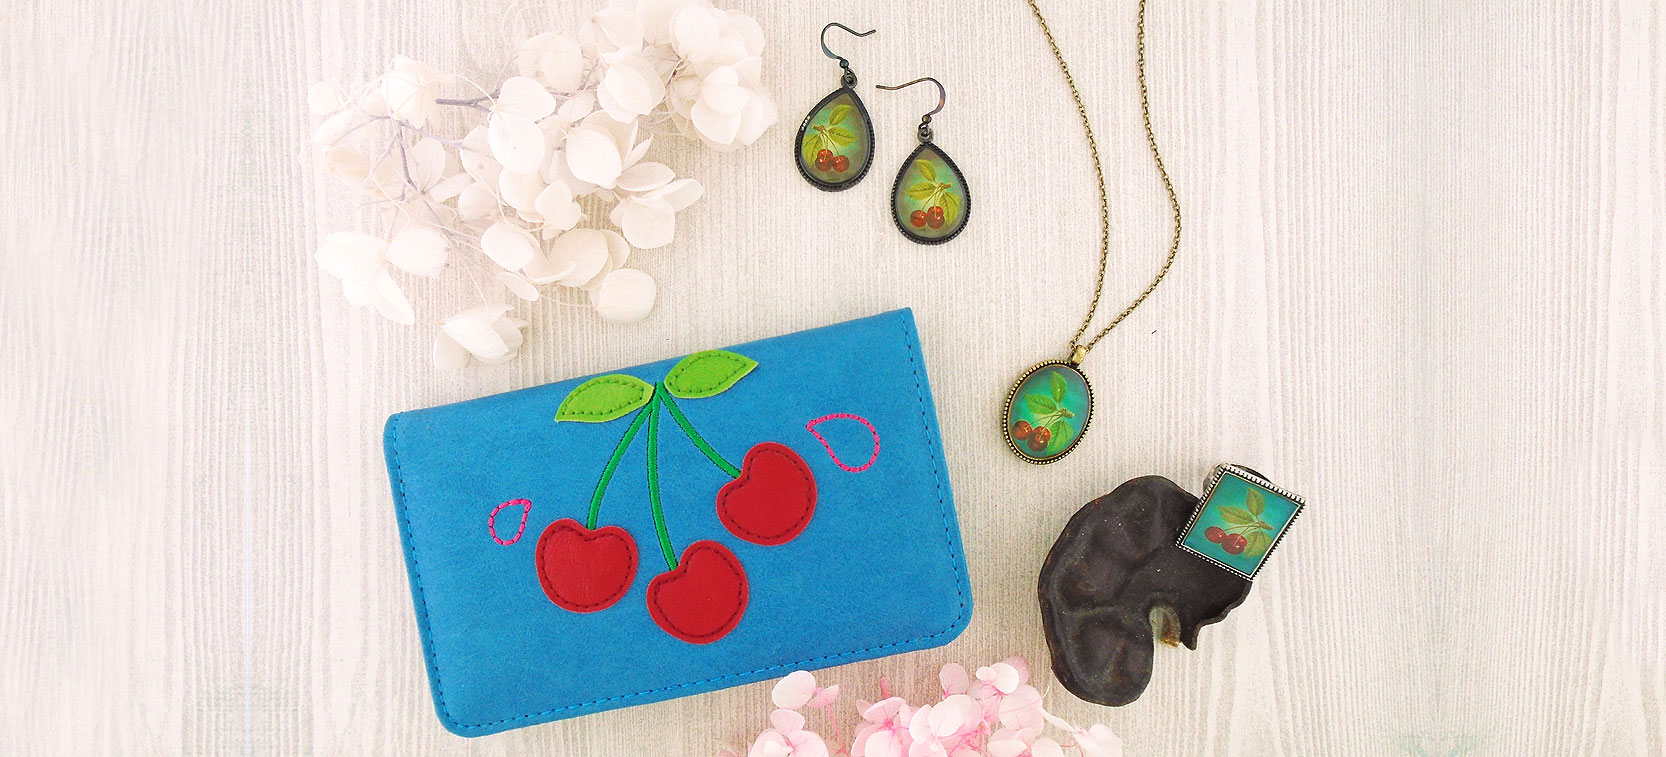 LAVISHY design and wholesale cherry themed vegan accessories and gfits to gift shops, boutiques and book shops, souvenir stores in Canada, USA and worldwide.